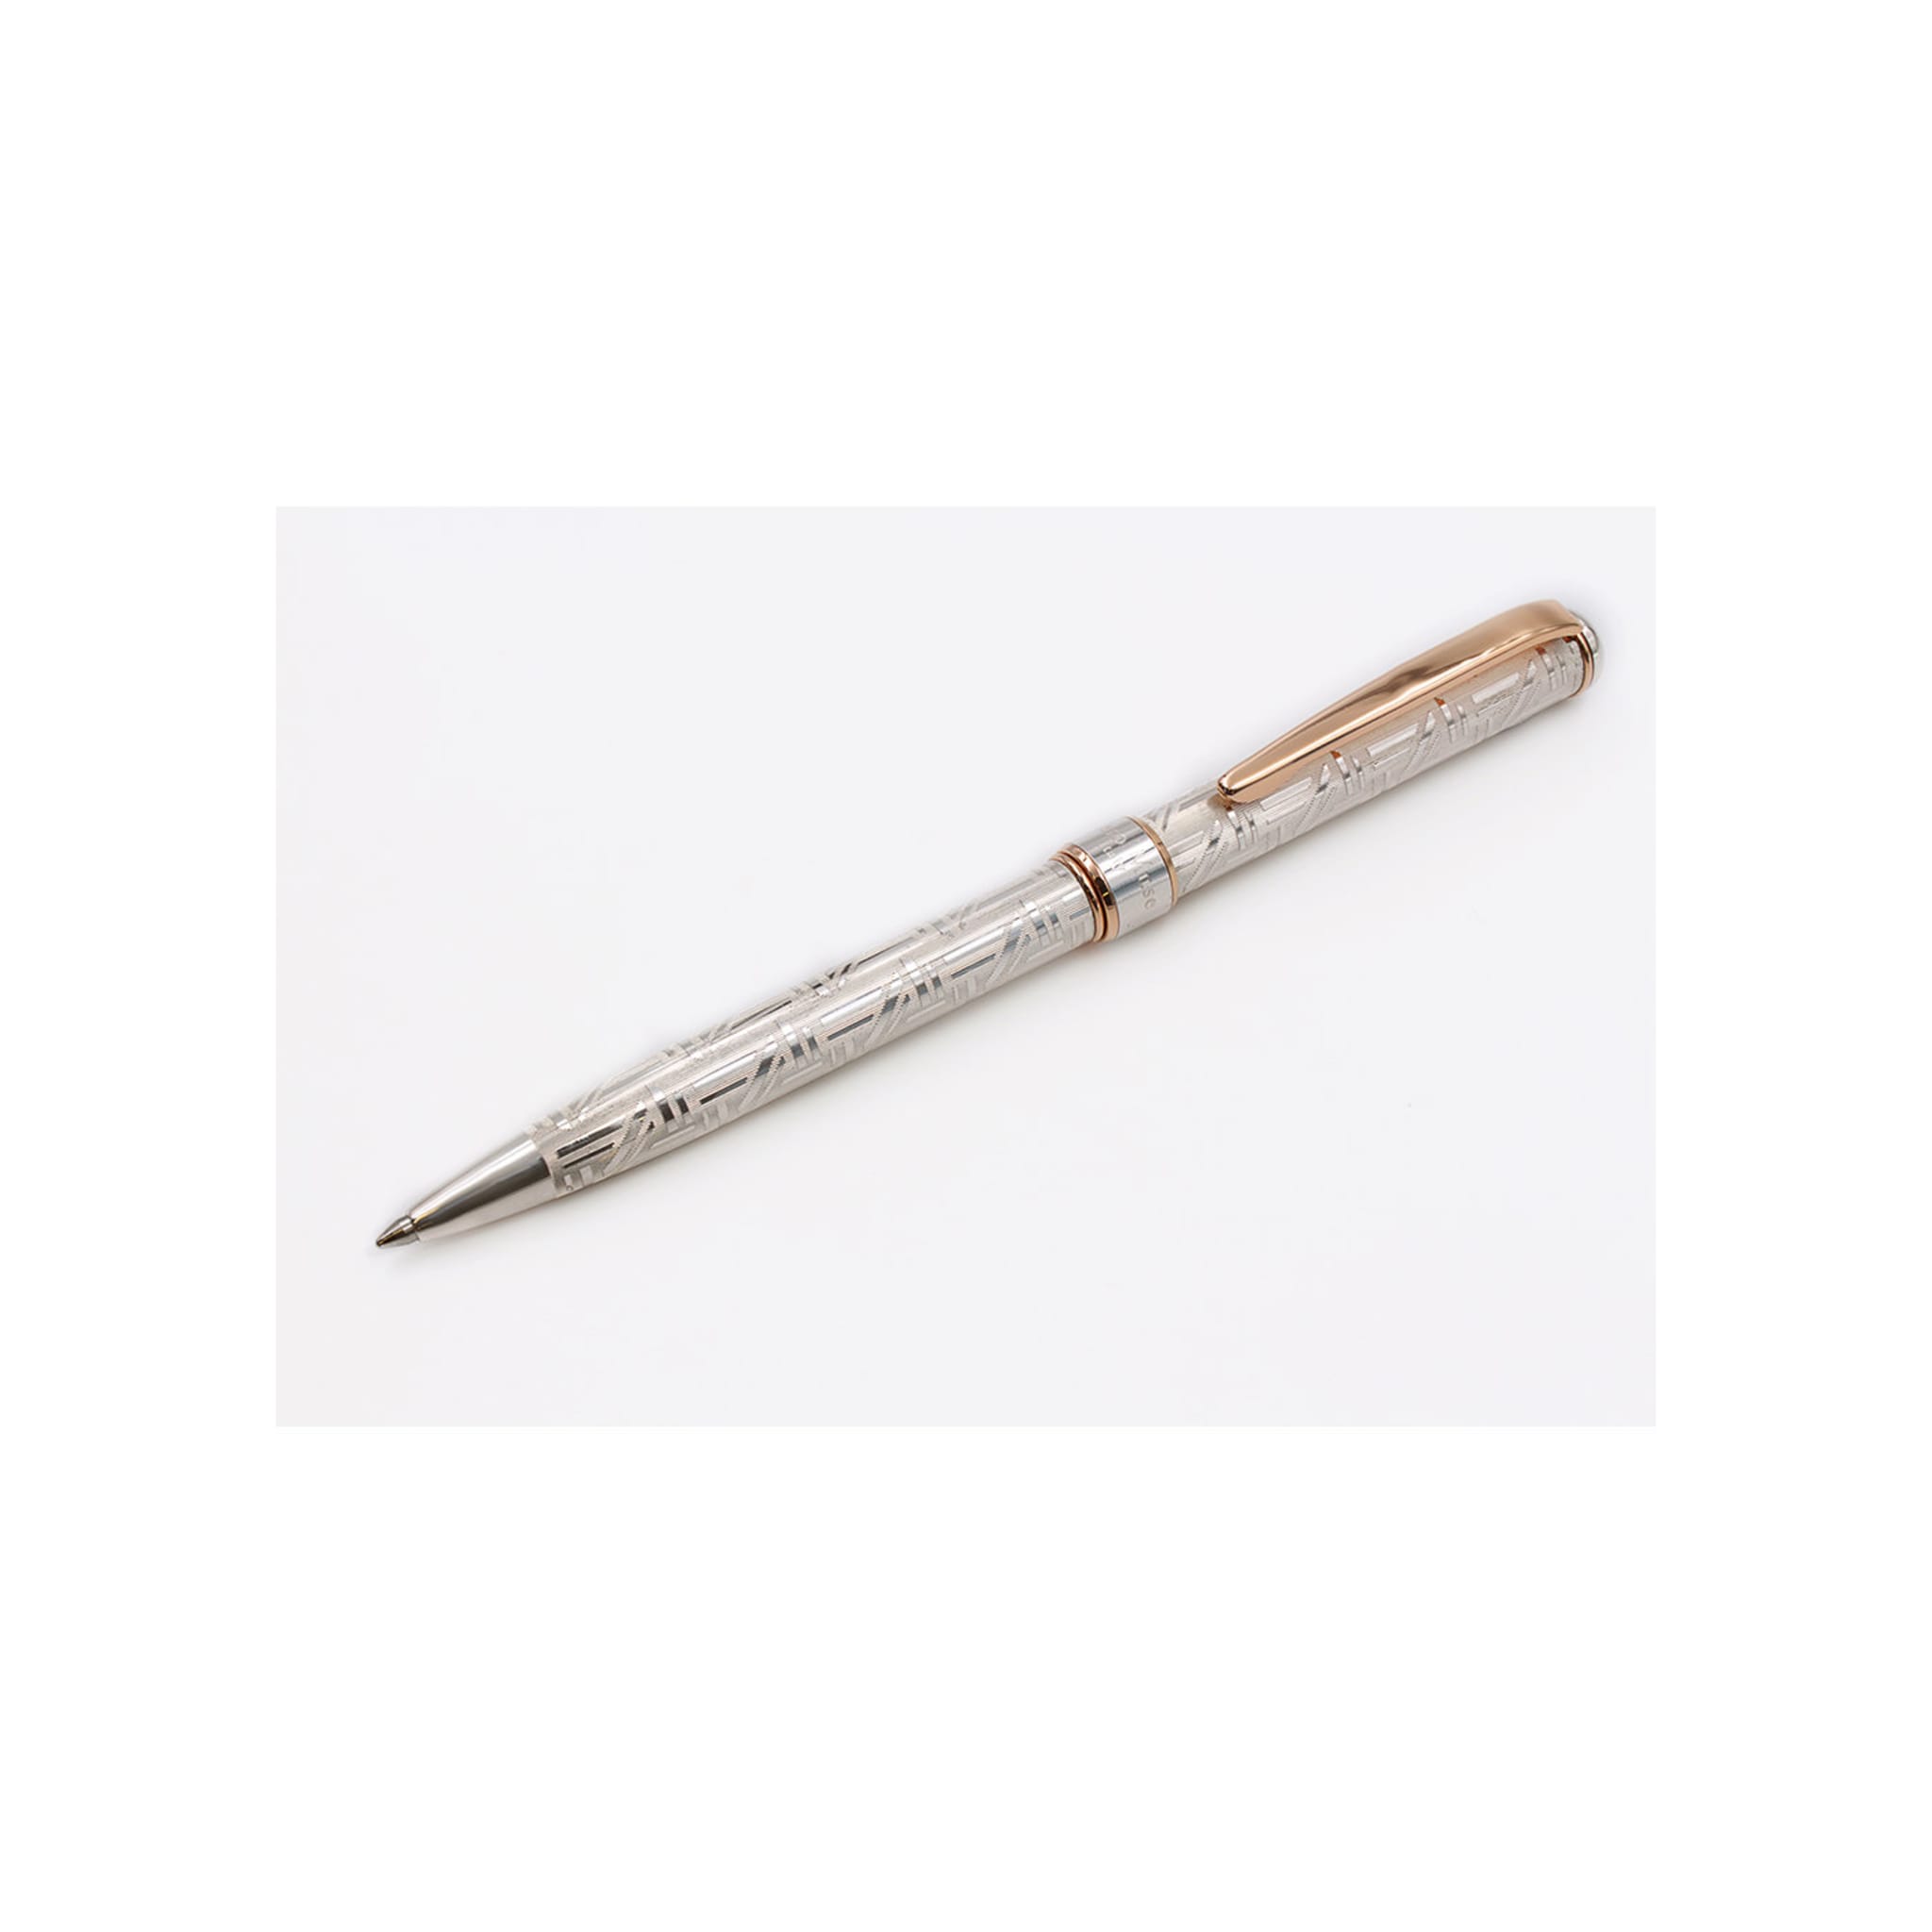 Silver and Pink Gold Geometric Ballpoint Pen - Alternative view 1